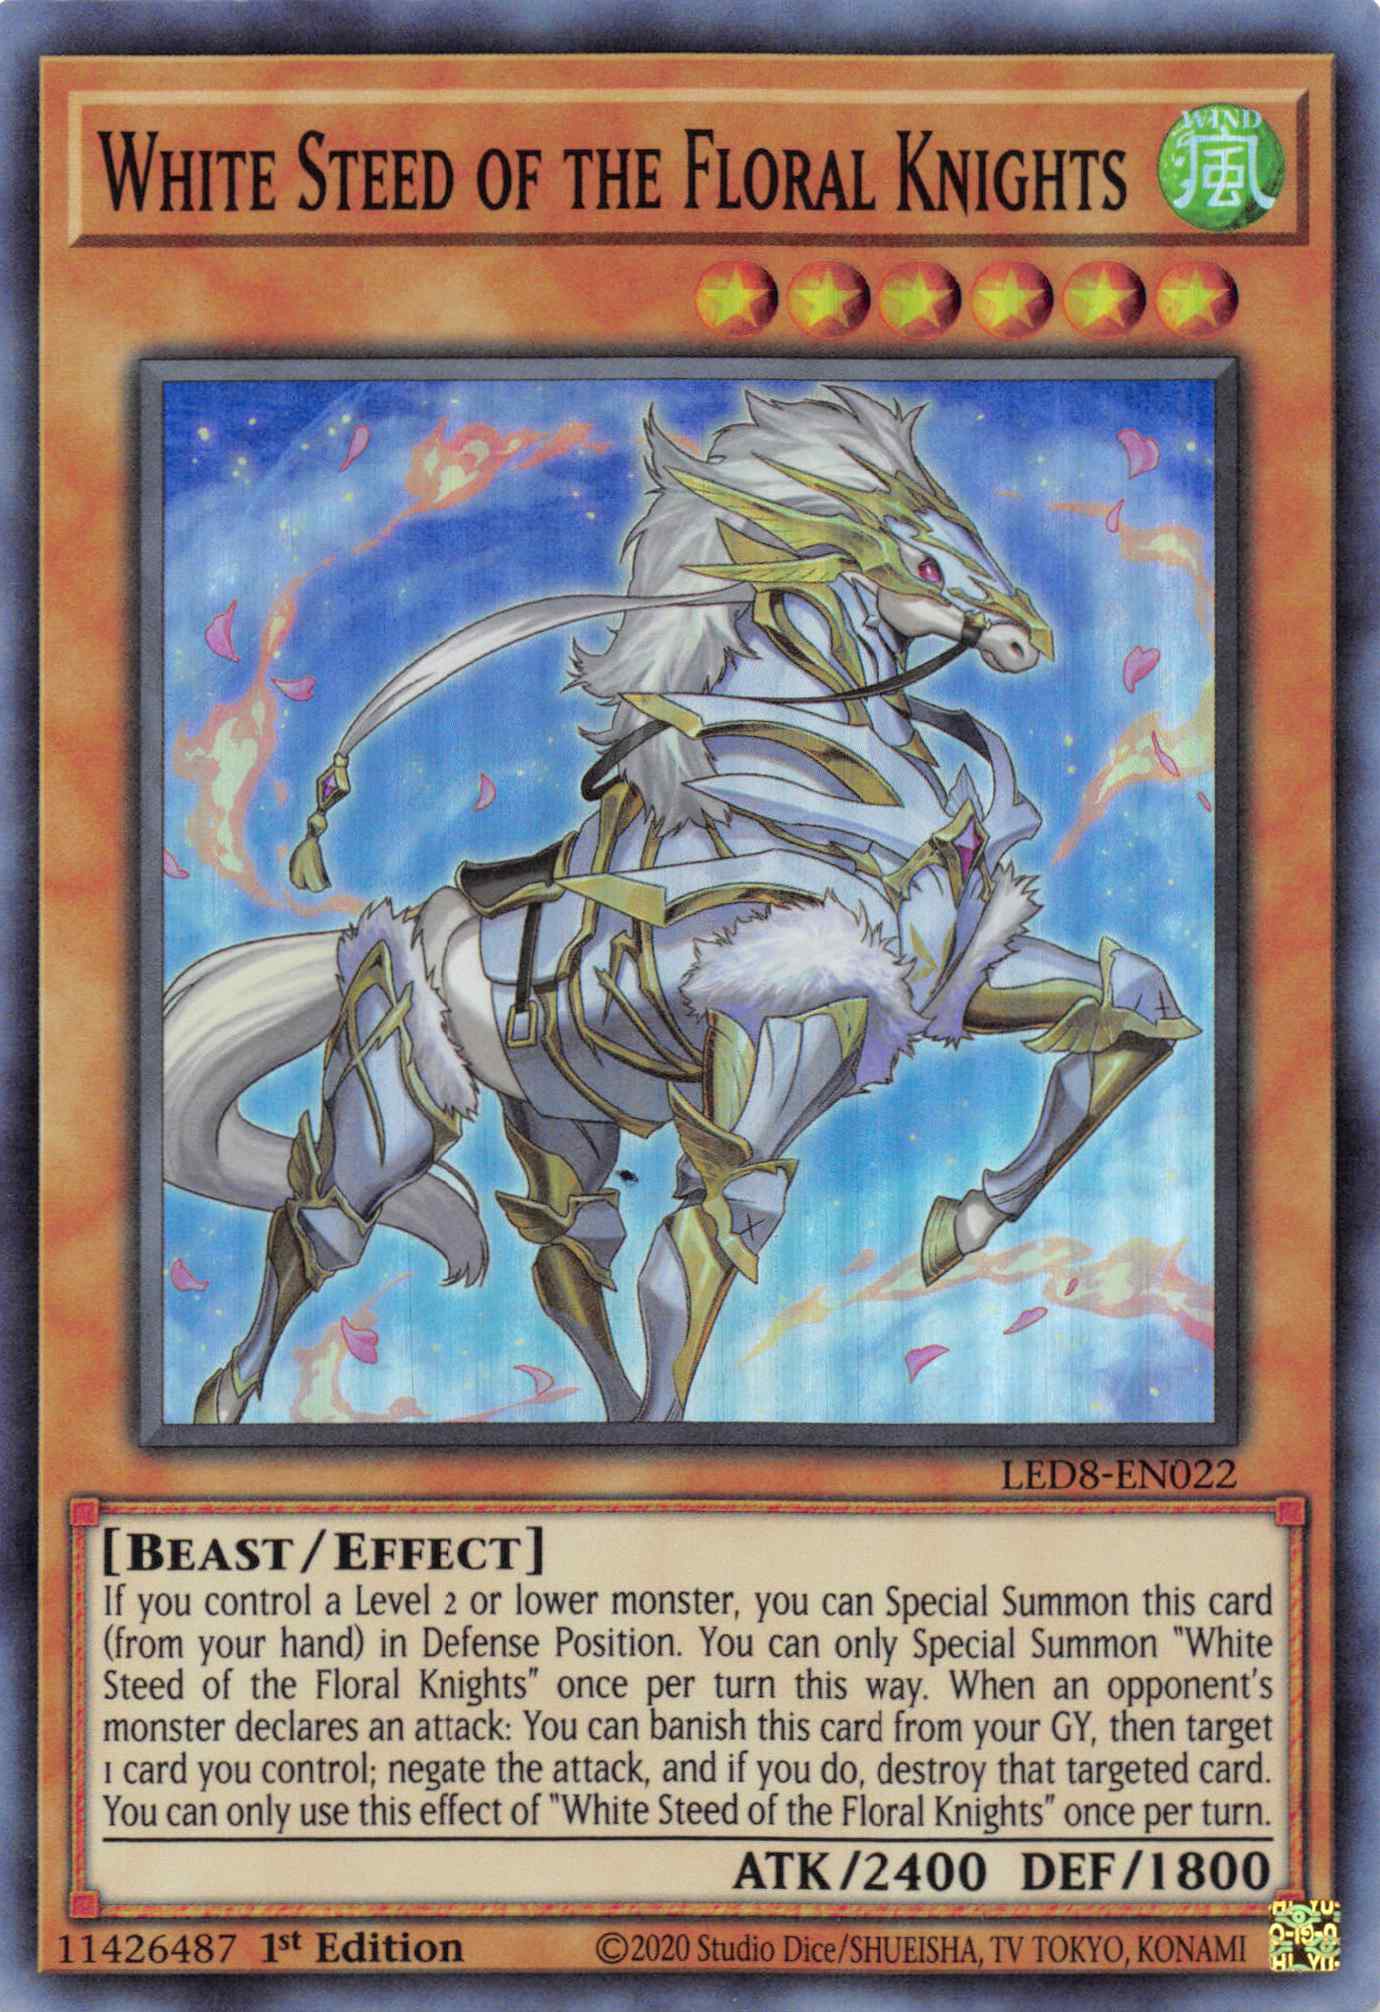 White Steed of the Floral Knights [LED8-EN022] Super Rare | Pegasus Games WI